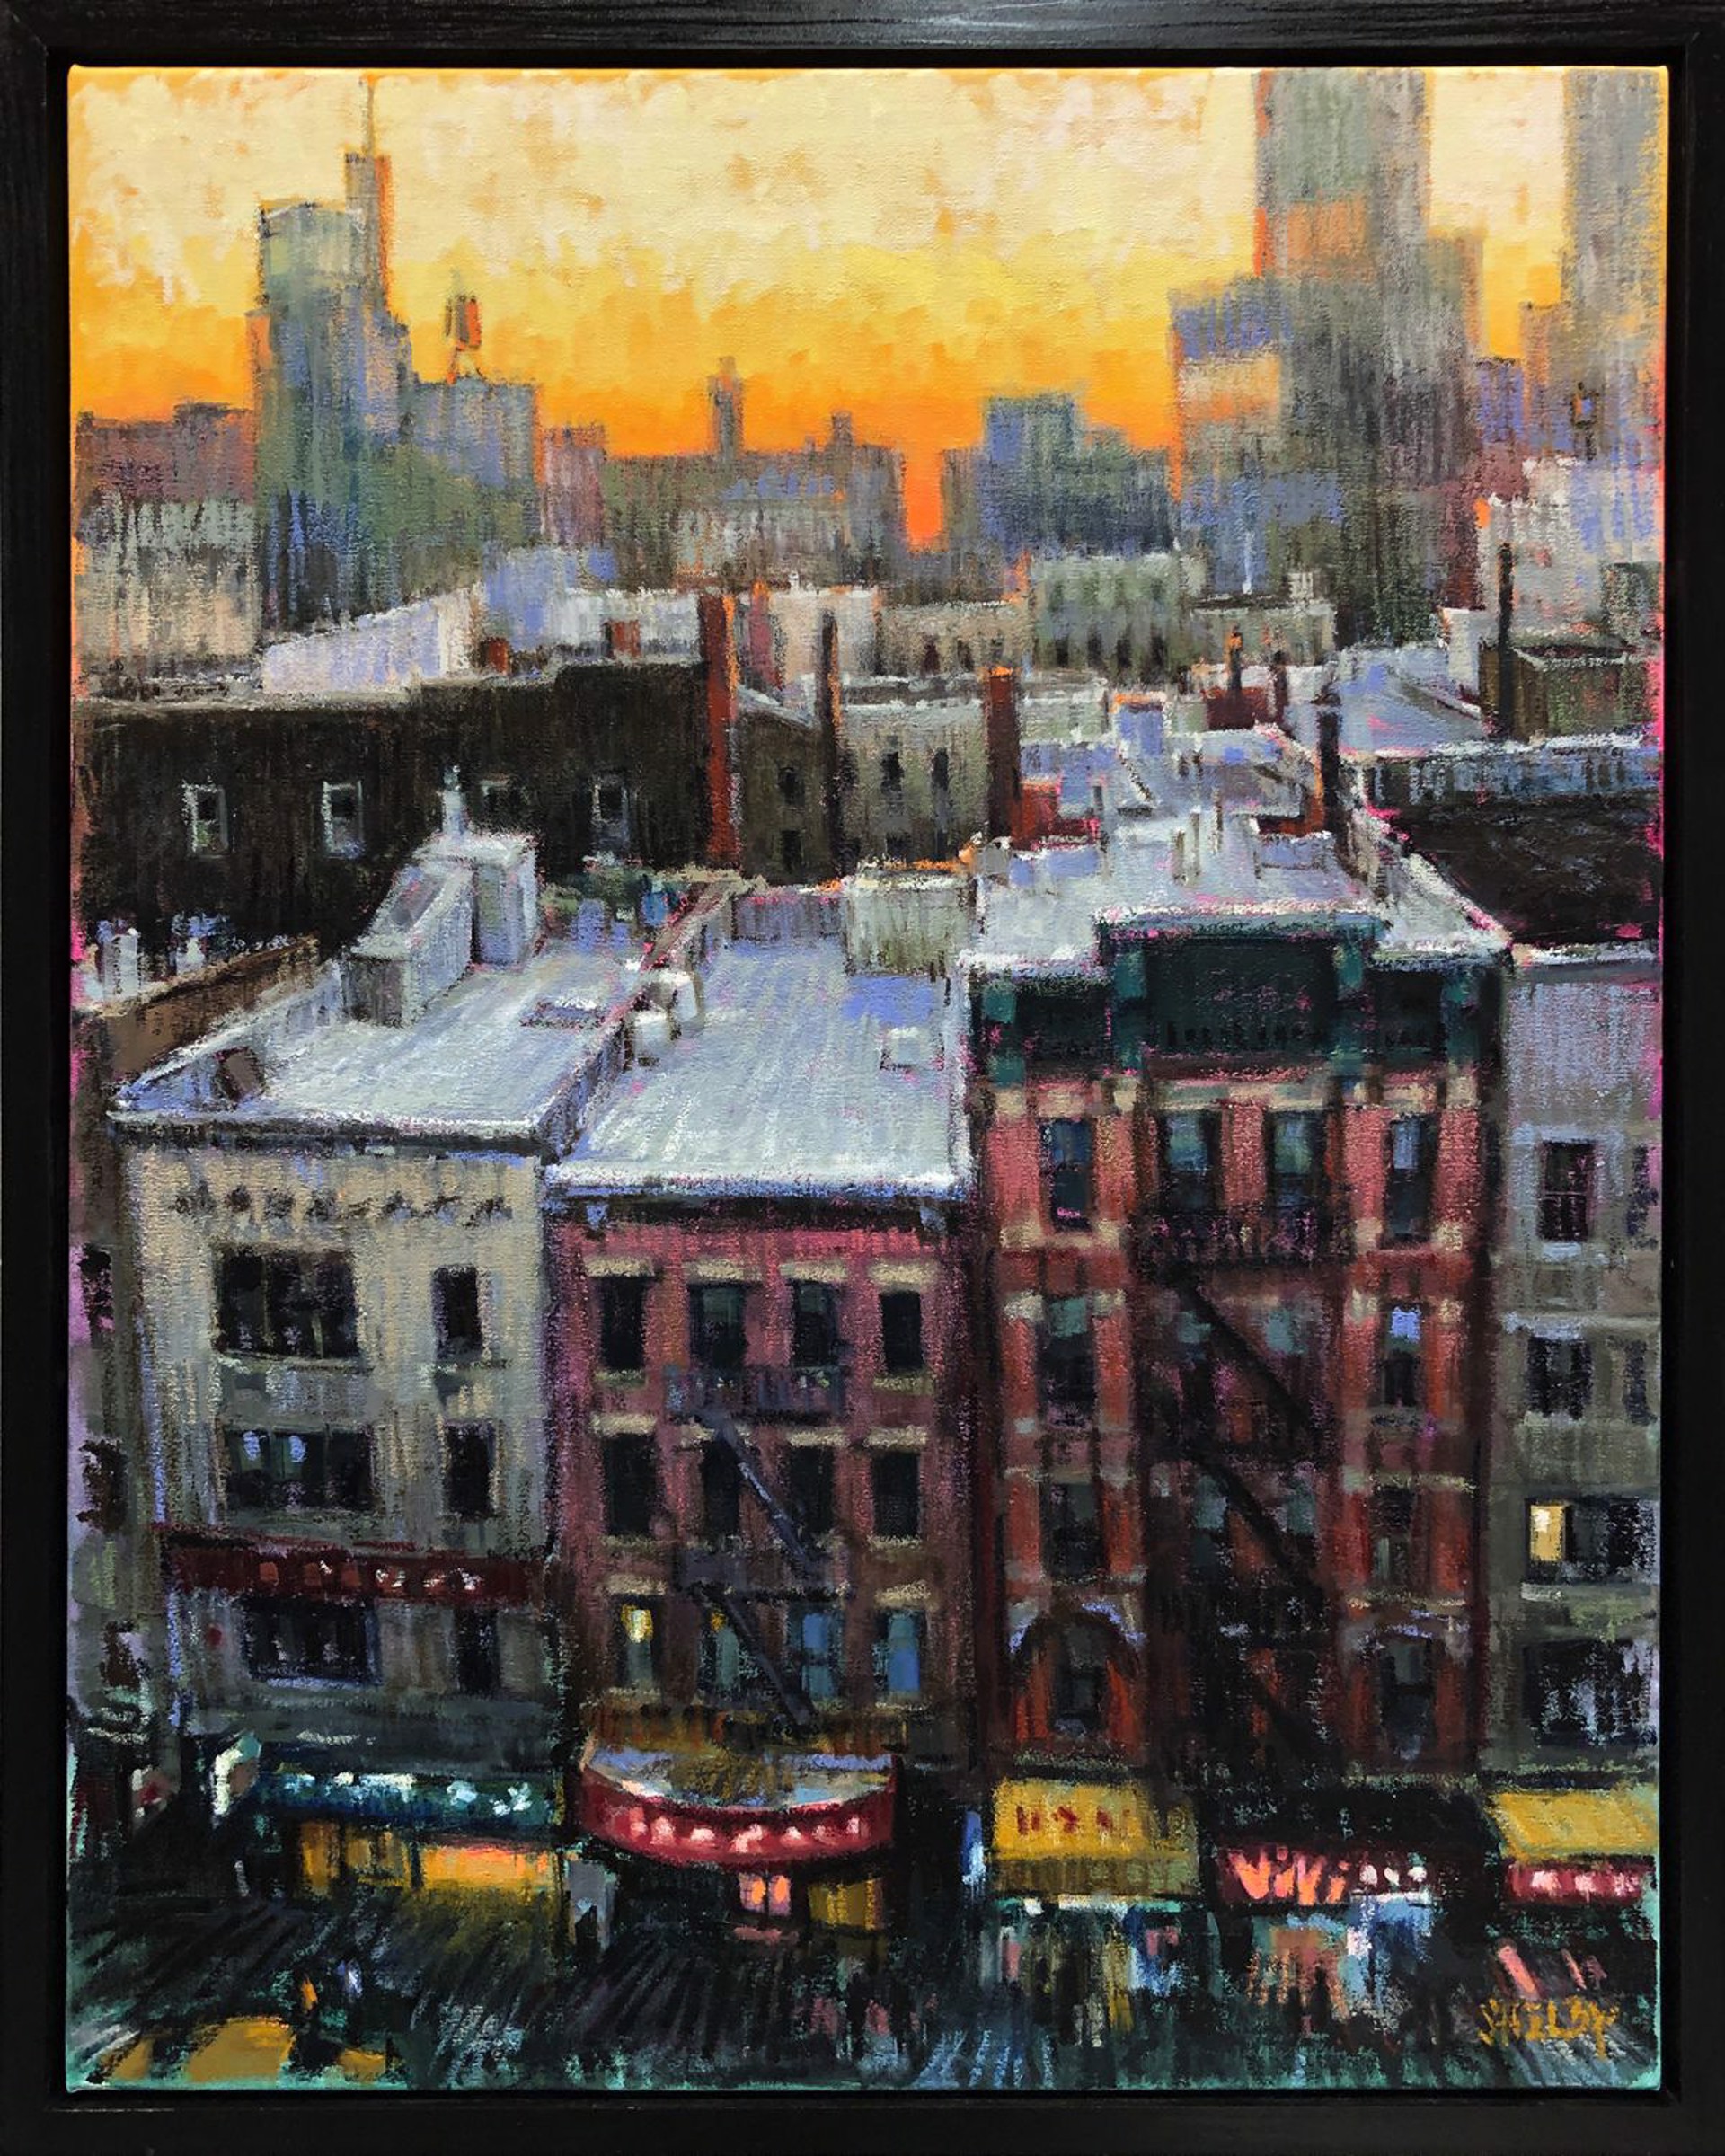 Sundown Chinatown by Shelby Keefe